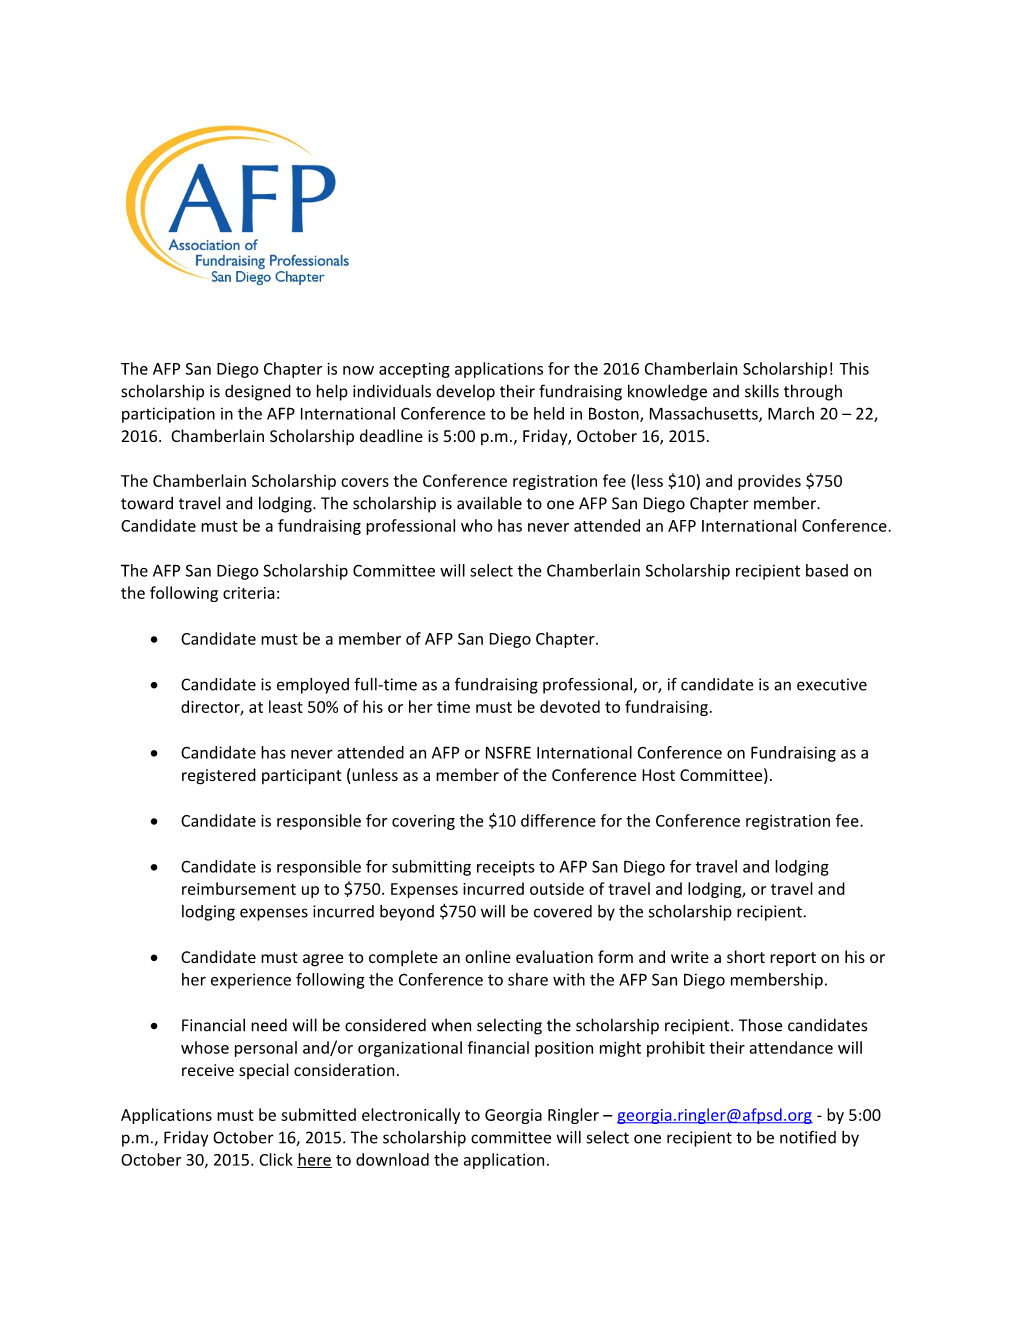 Candidate Must Be a Member of AFP San Diego Chapter